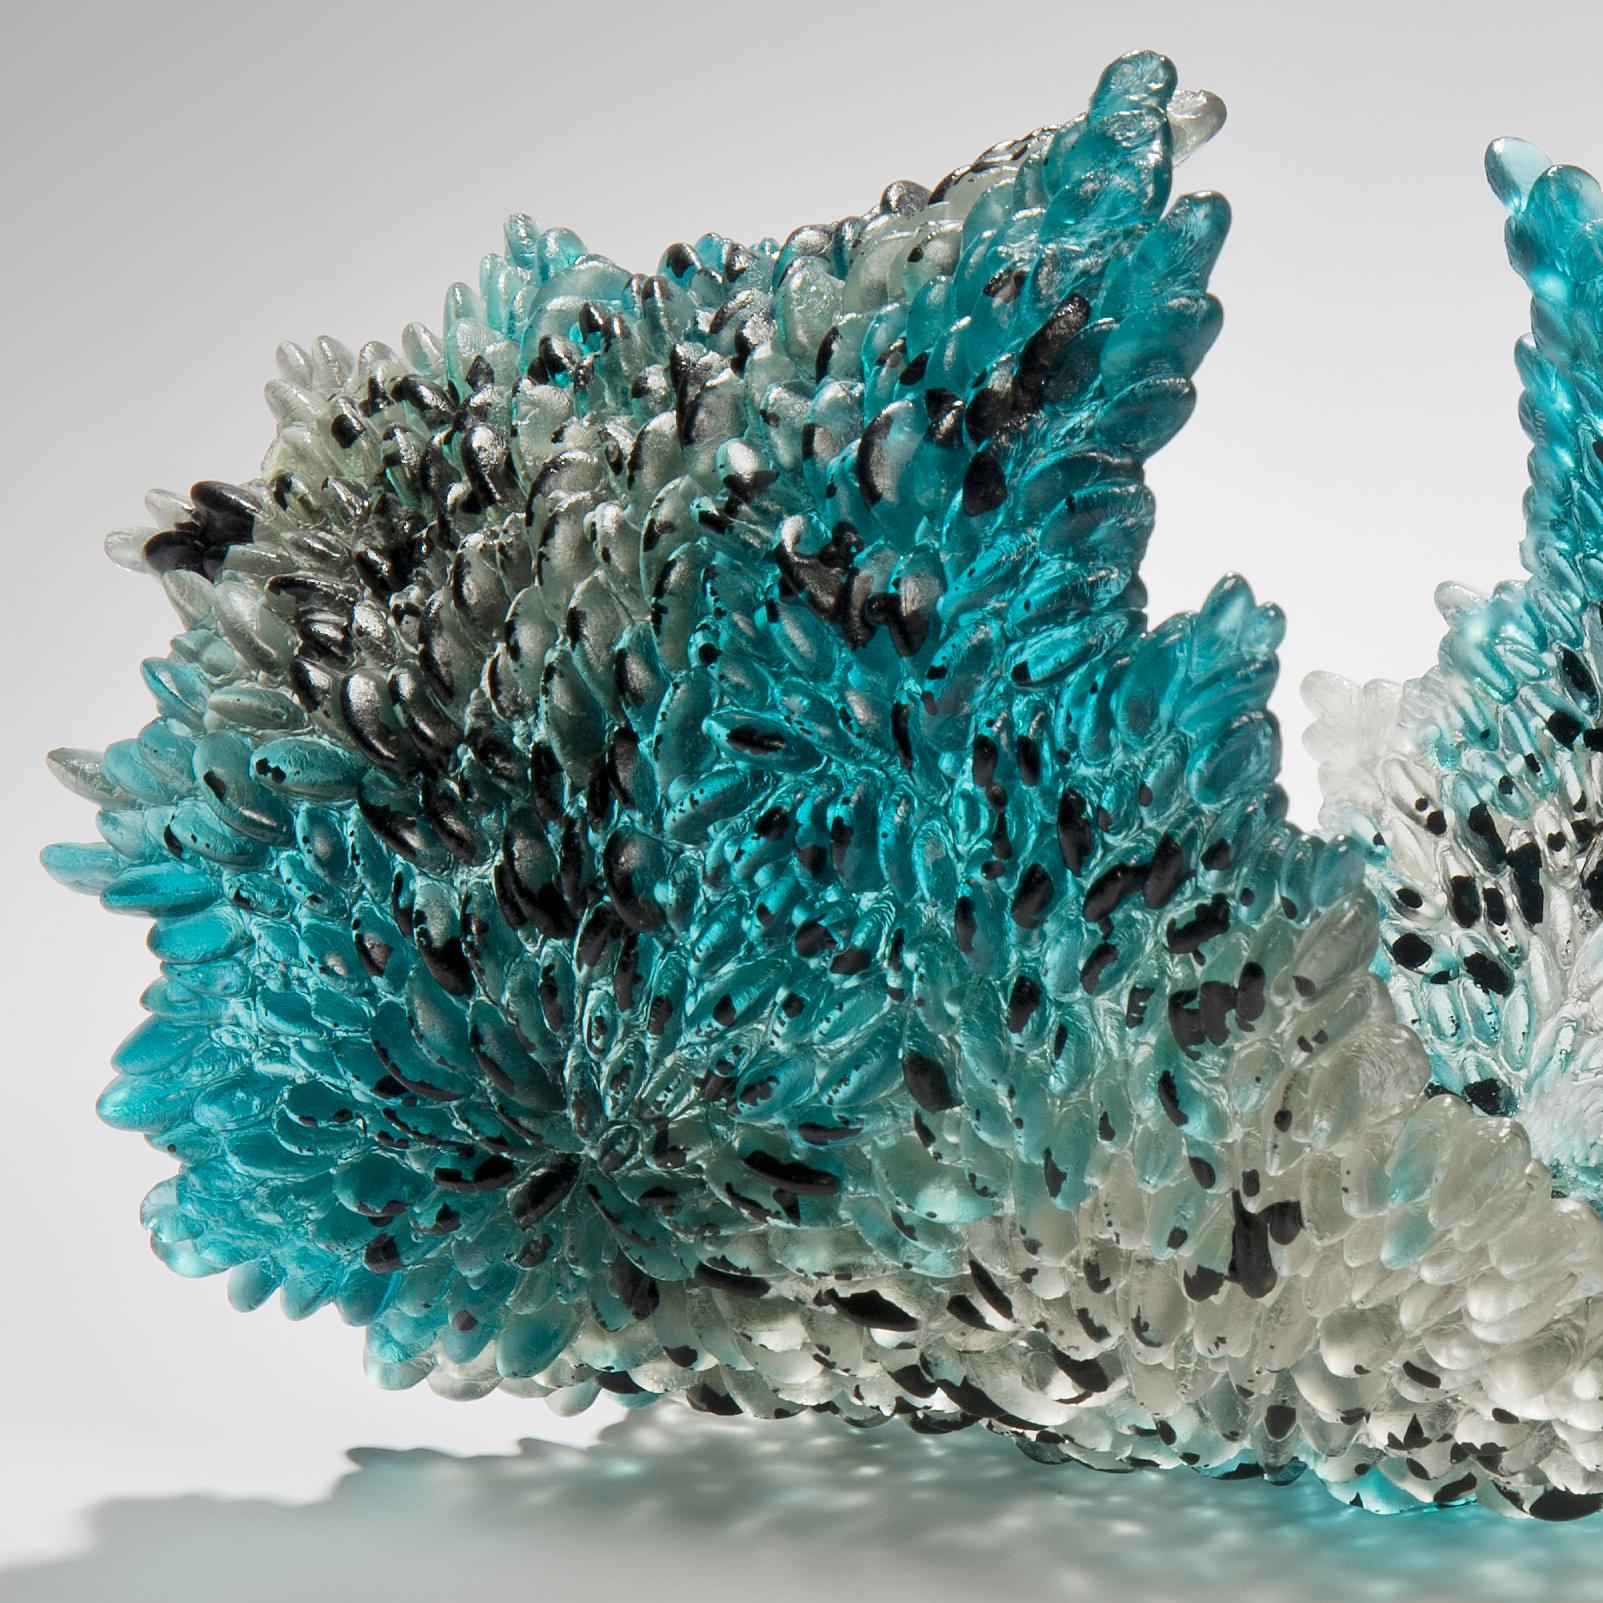 British Acculturation, a Glass Sculpture in Clear, Teal and Black by Nina Casson McGarva